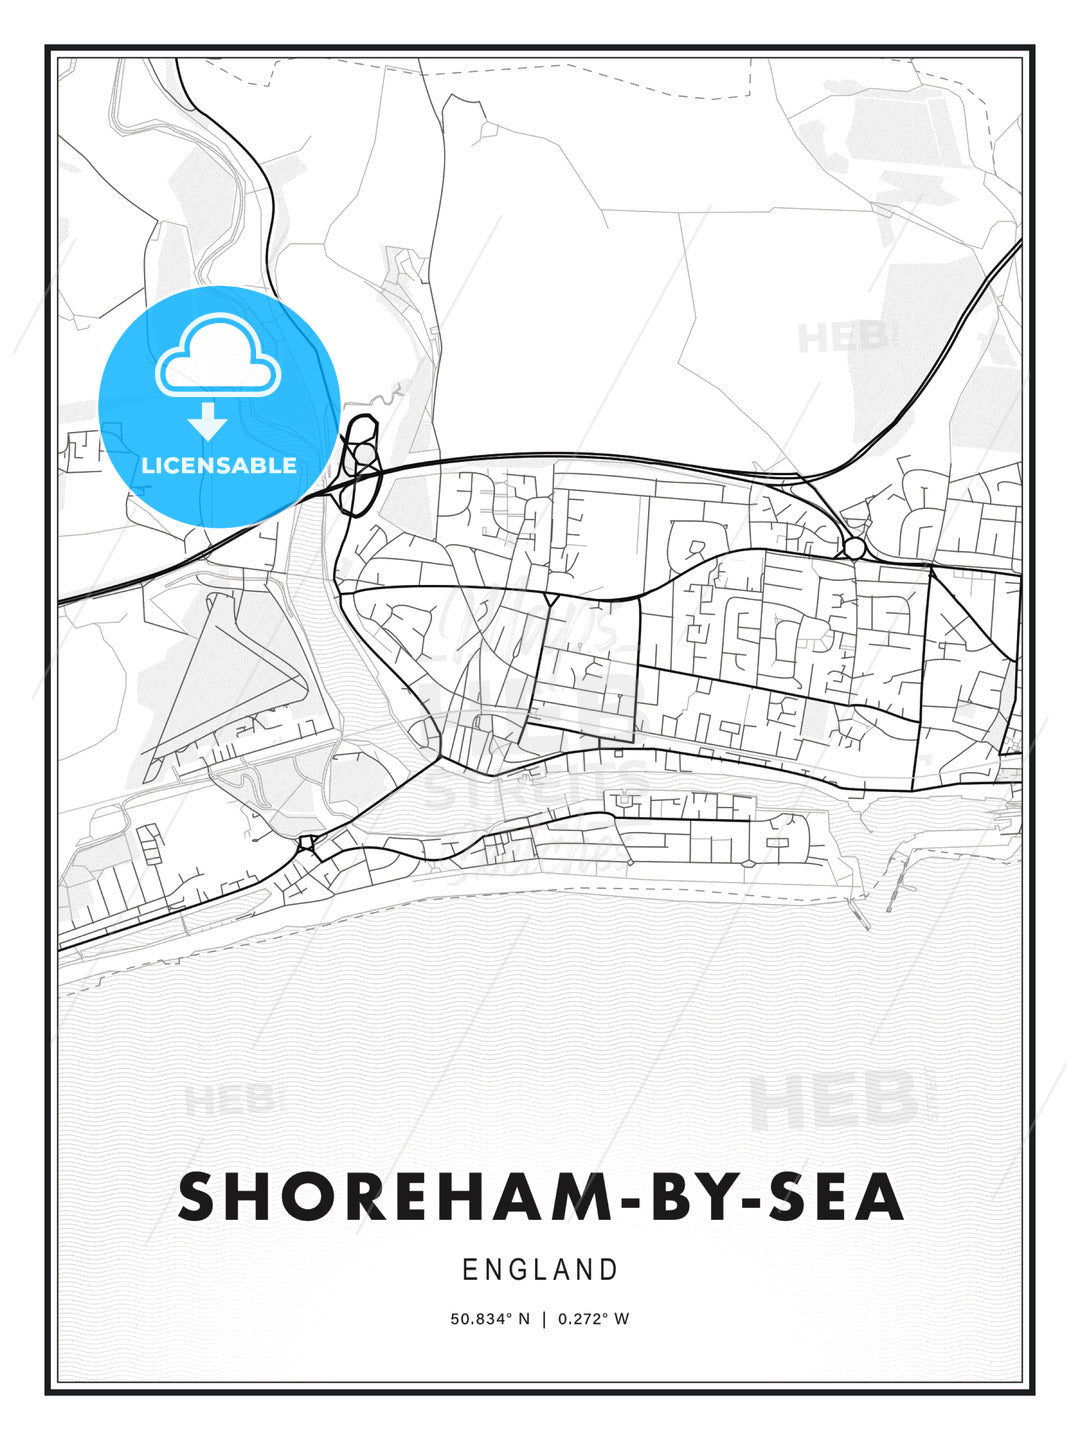 Shoreham-by-Sea, England, Modern Print Template in Various Formats - HEBSTREITS Sketches